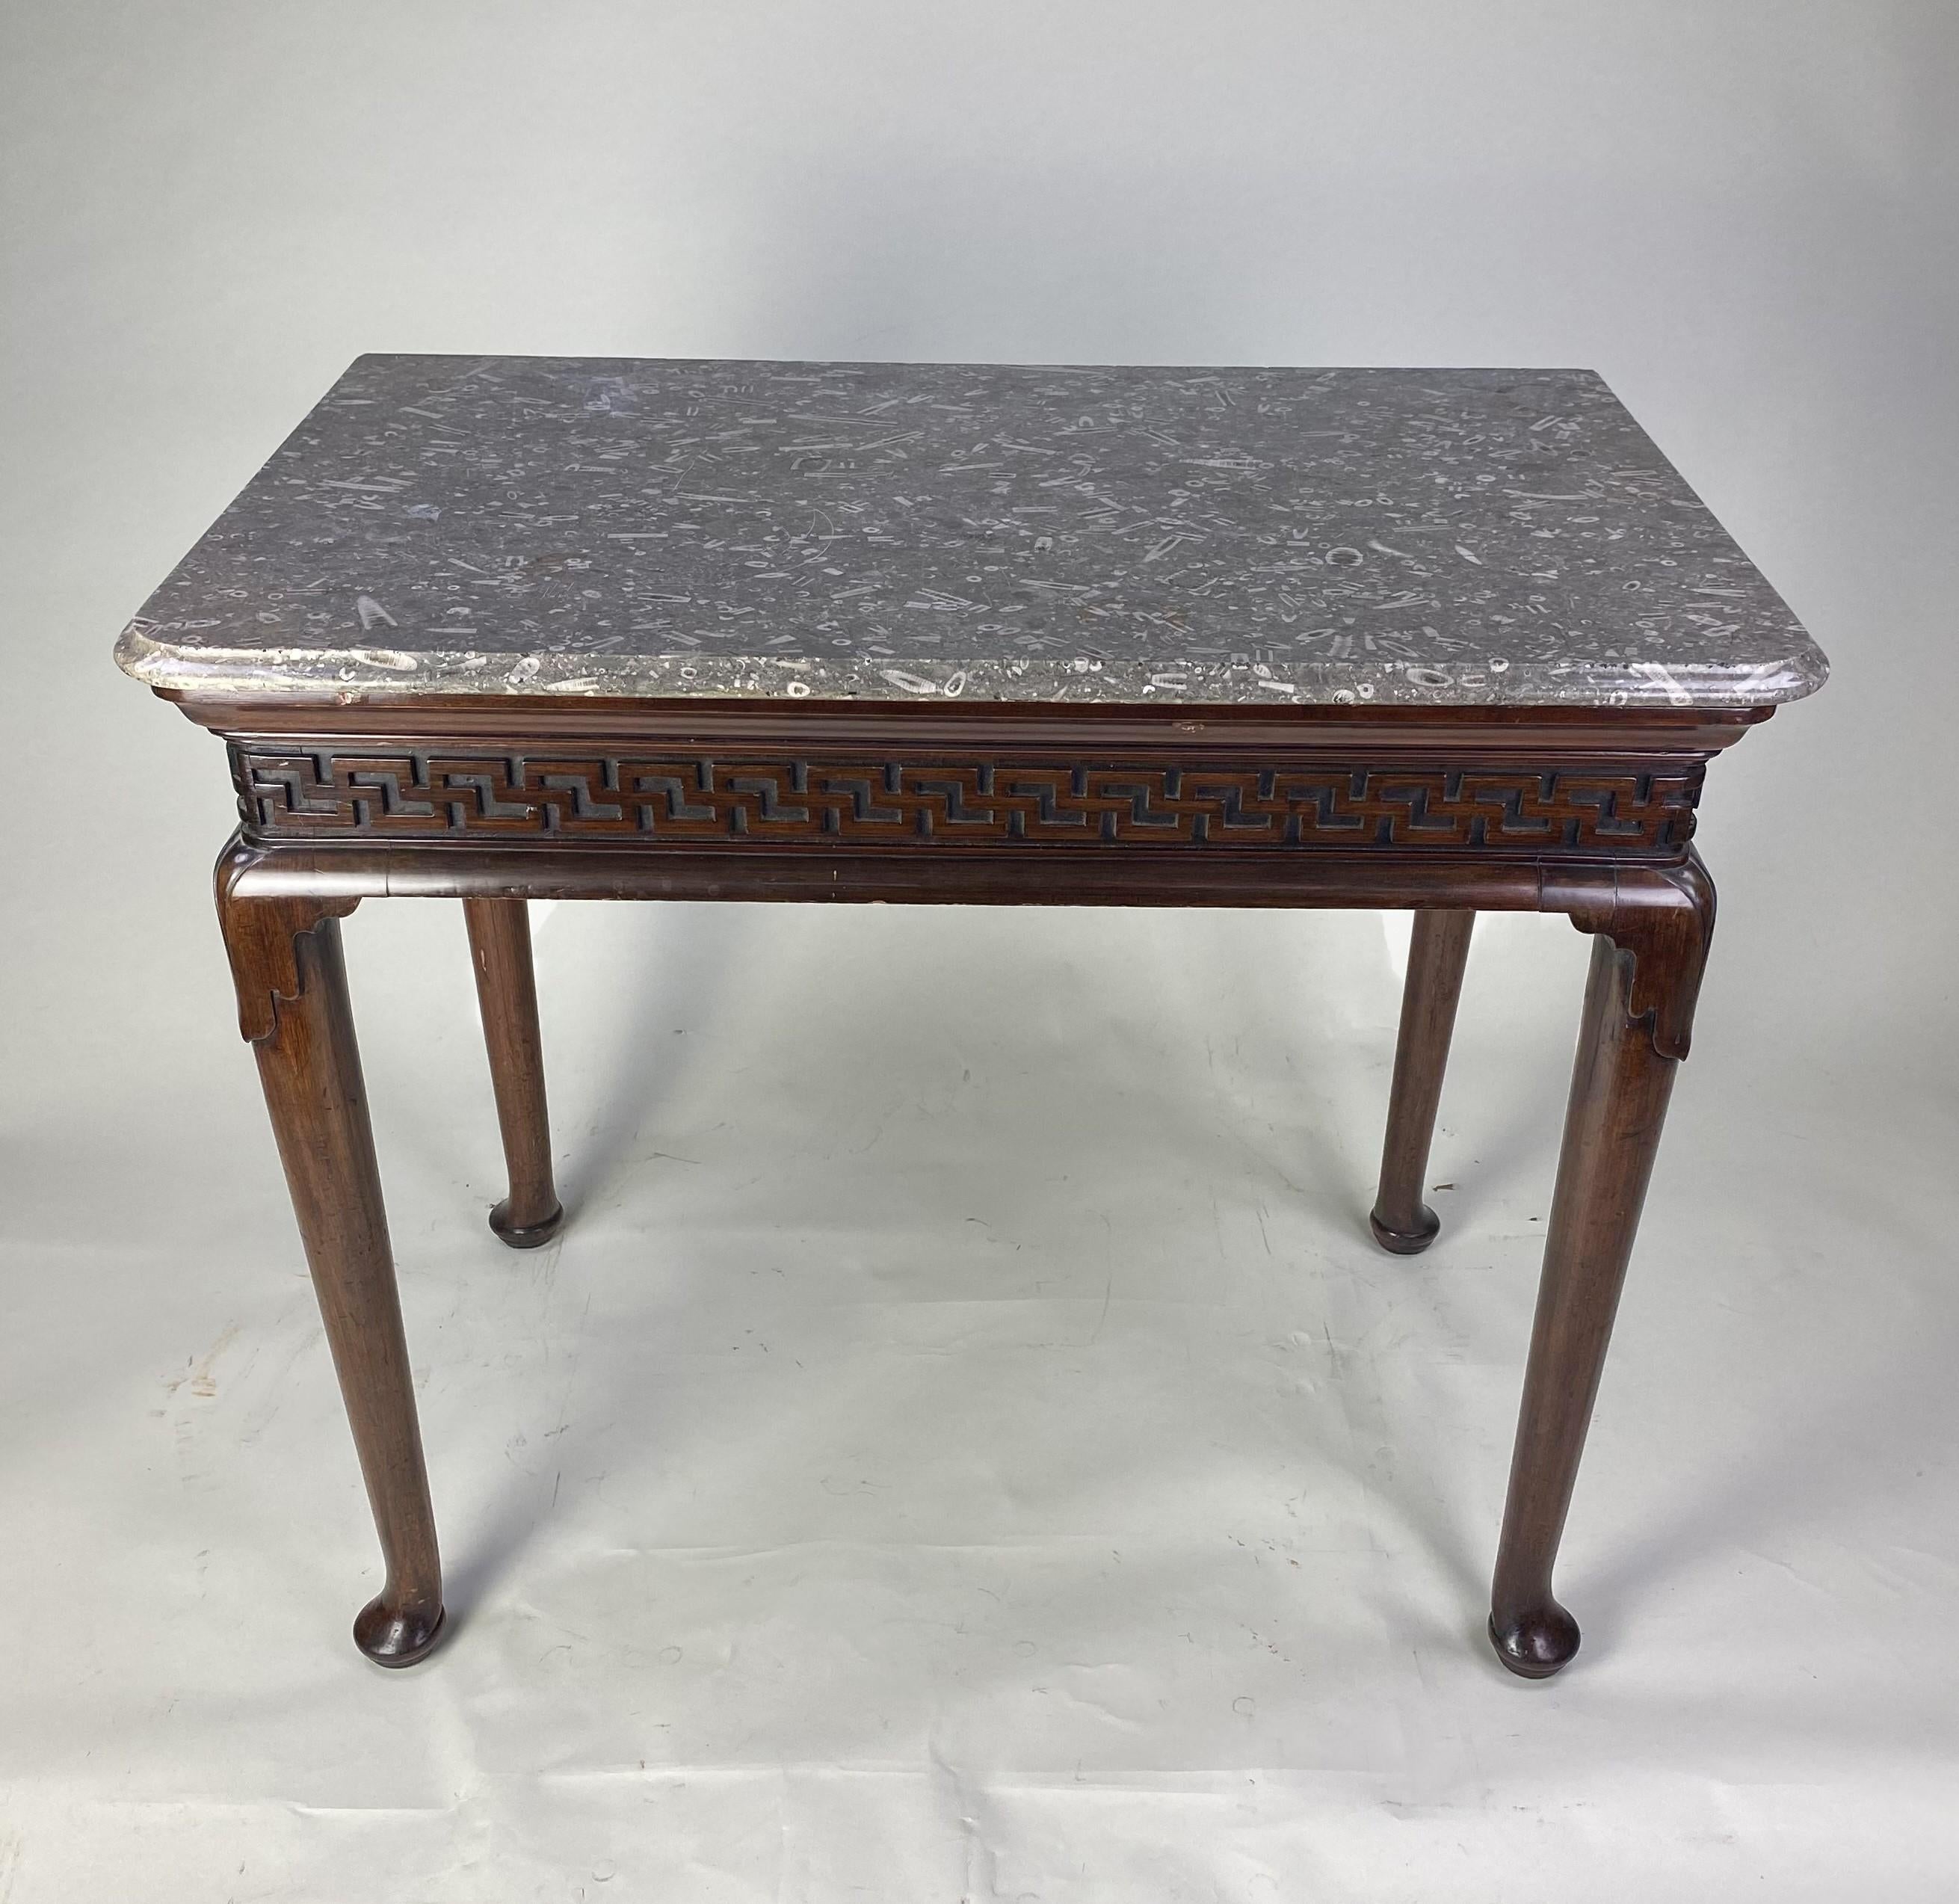 A fine and rare early 18th century red walnut cabriole leg Hall Table with rare and original mable top, known as 'Derbyshire Fossil'. The apron decorated with an usual geometric pattern similar to a 'Greek Key' ornament. this unusual pattern has